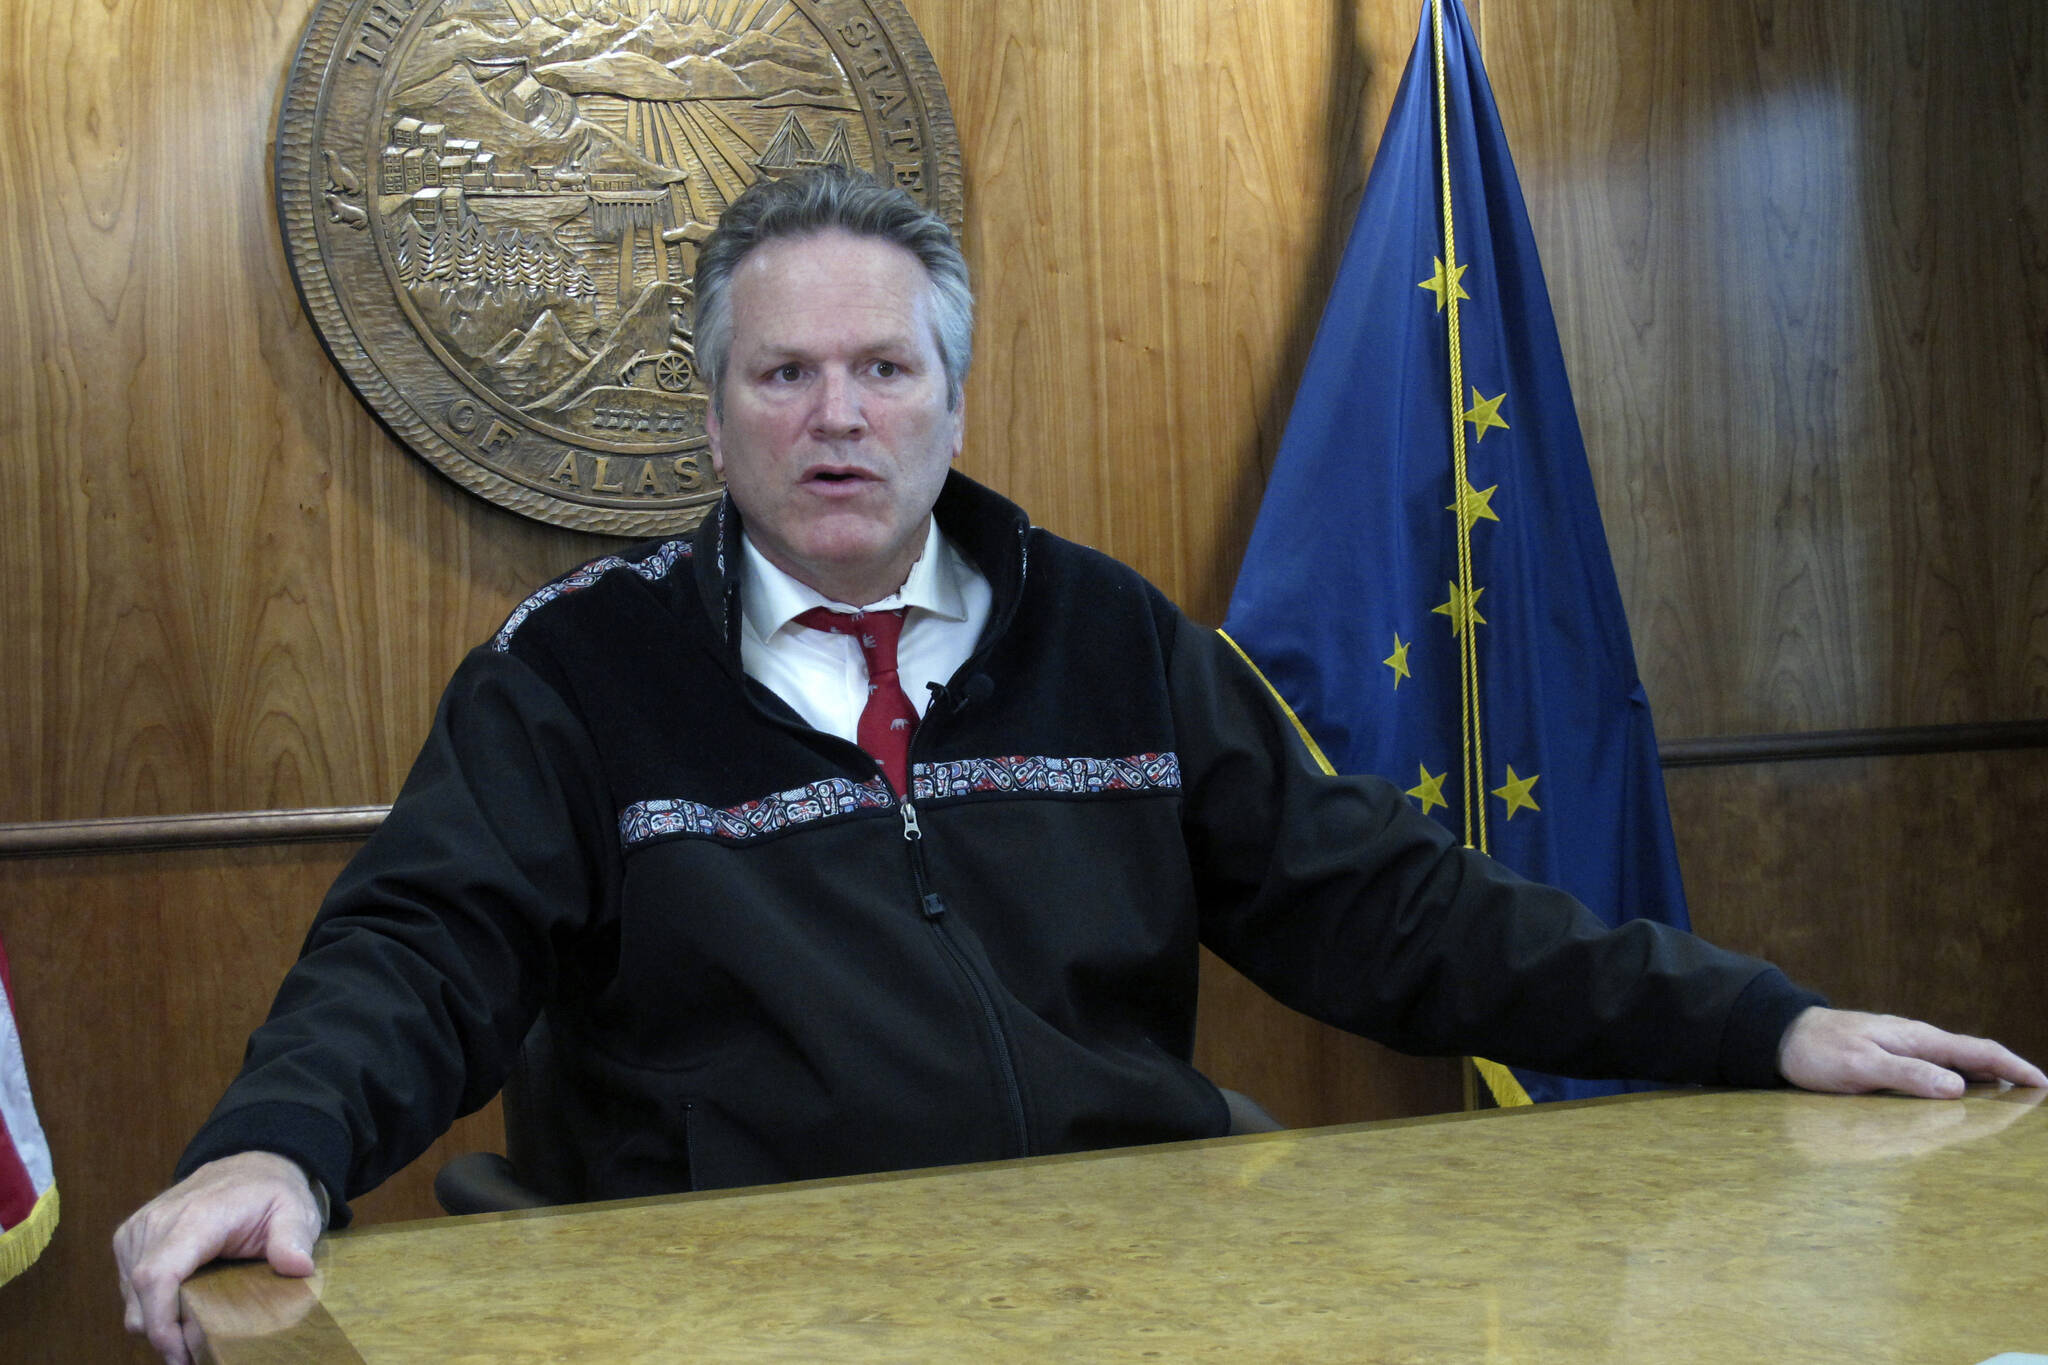 Alaska Gov. Mike Dunleavy speaks with reporters during a news briefing on Tuesday, Sept. 14, 2021, in Juneau, Alaska. Dunleavy said he doesn't see his acceptance of former President Donald Trump's endorsement as hurting his relationship with the state's senior U.S. senator, Republican Lisa Murkowski, who voted to convict Trump at his impeachment trial last year and whom Trump has vowed to fight in her reelection bid. (AP Photo/Becky Bohrer)